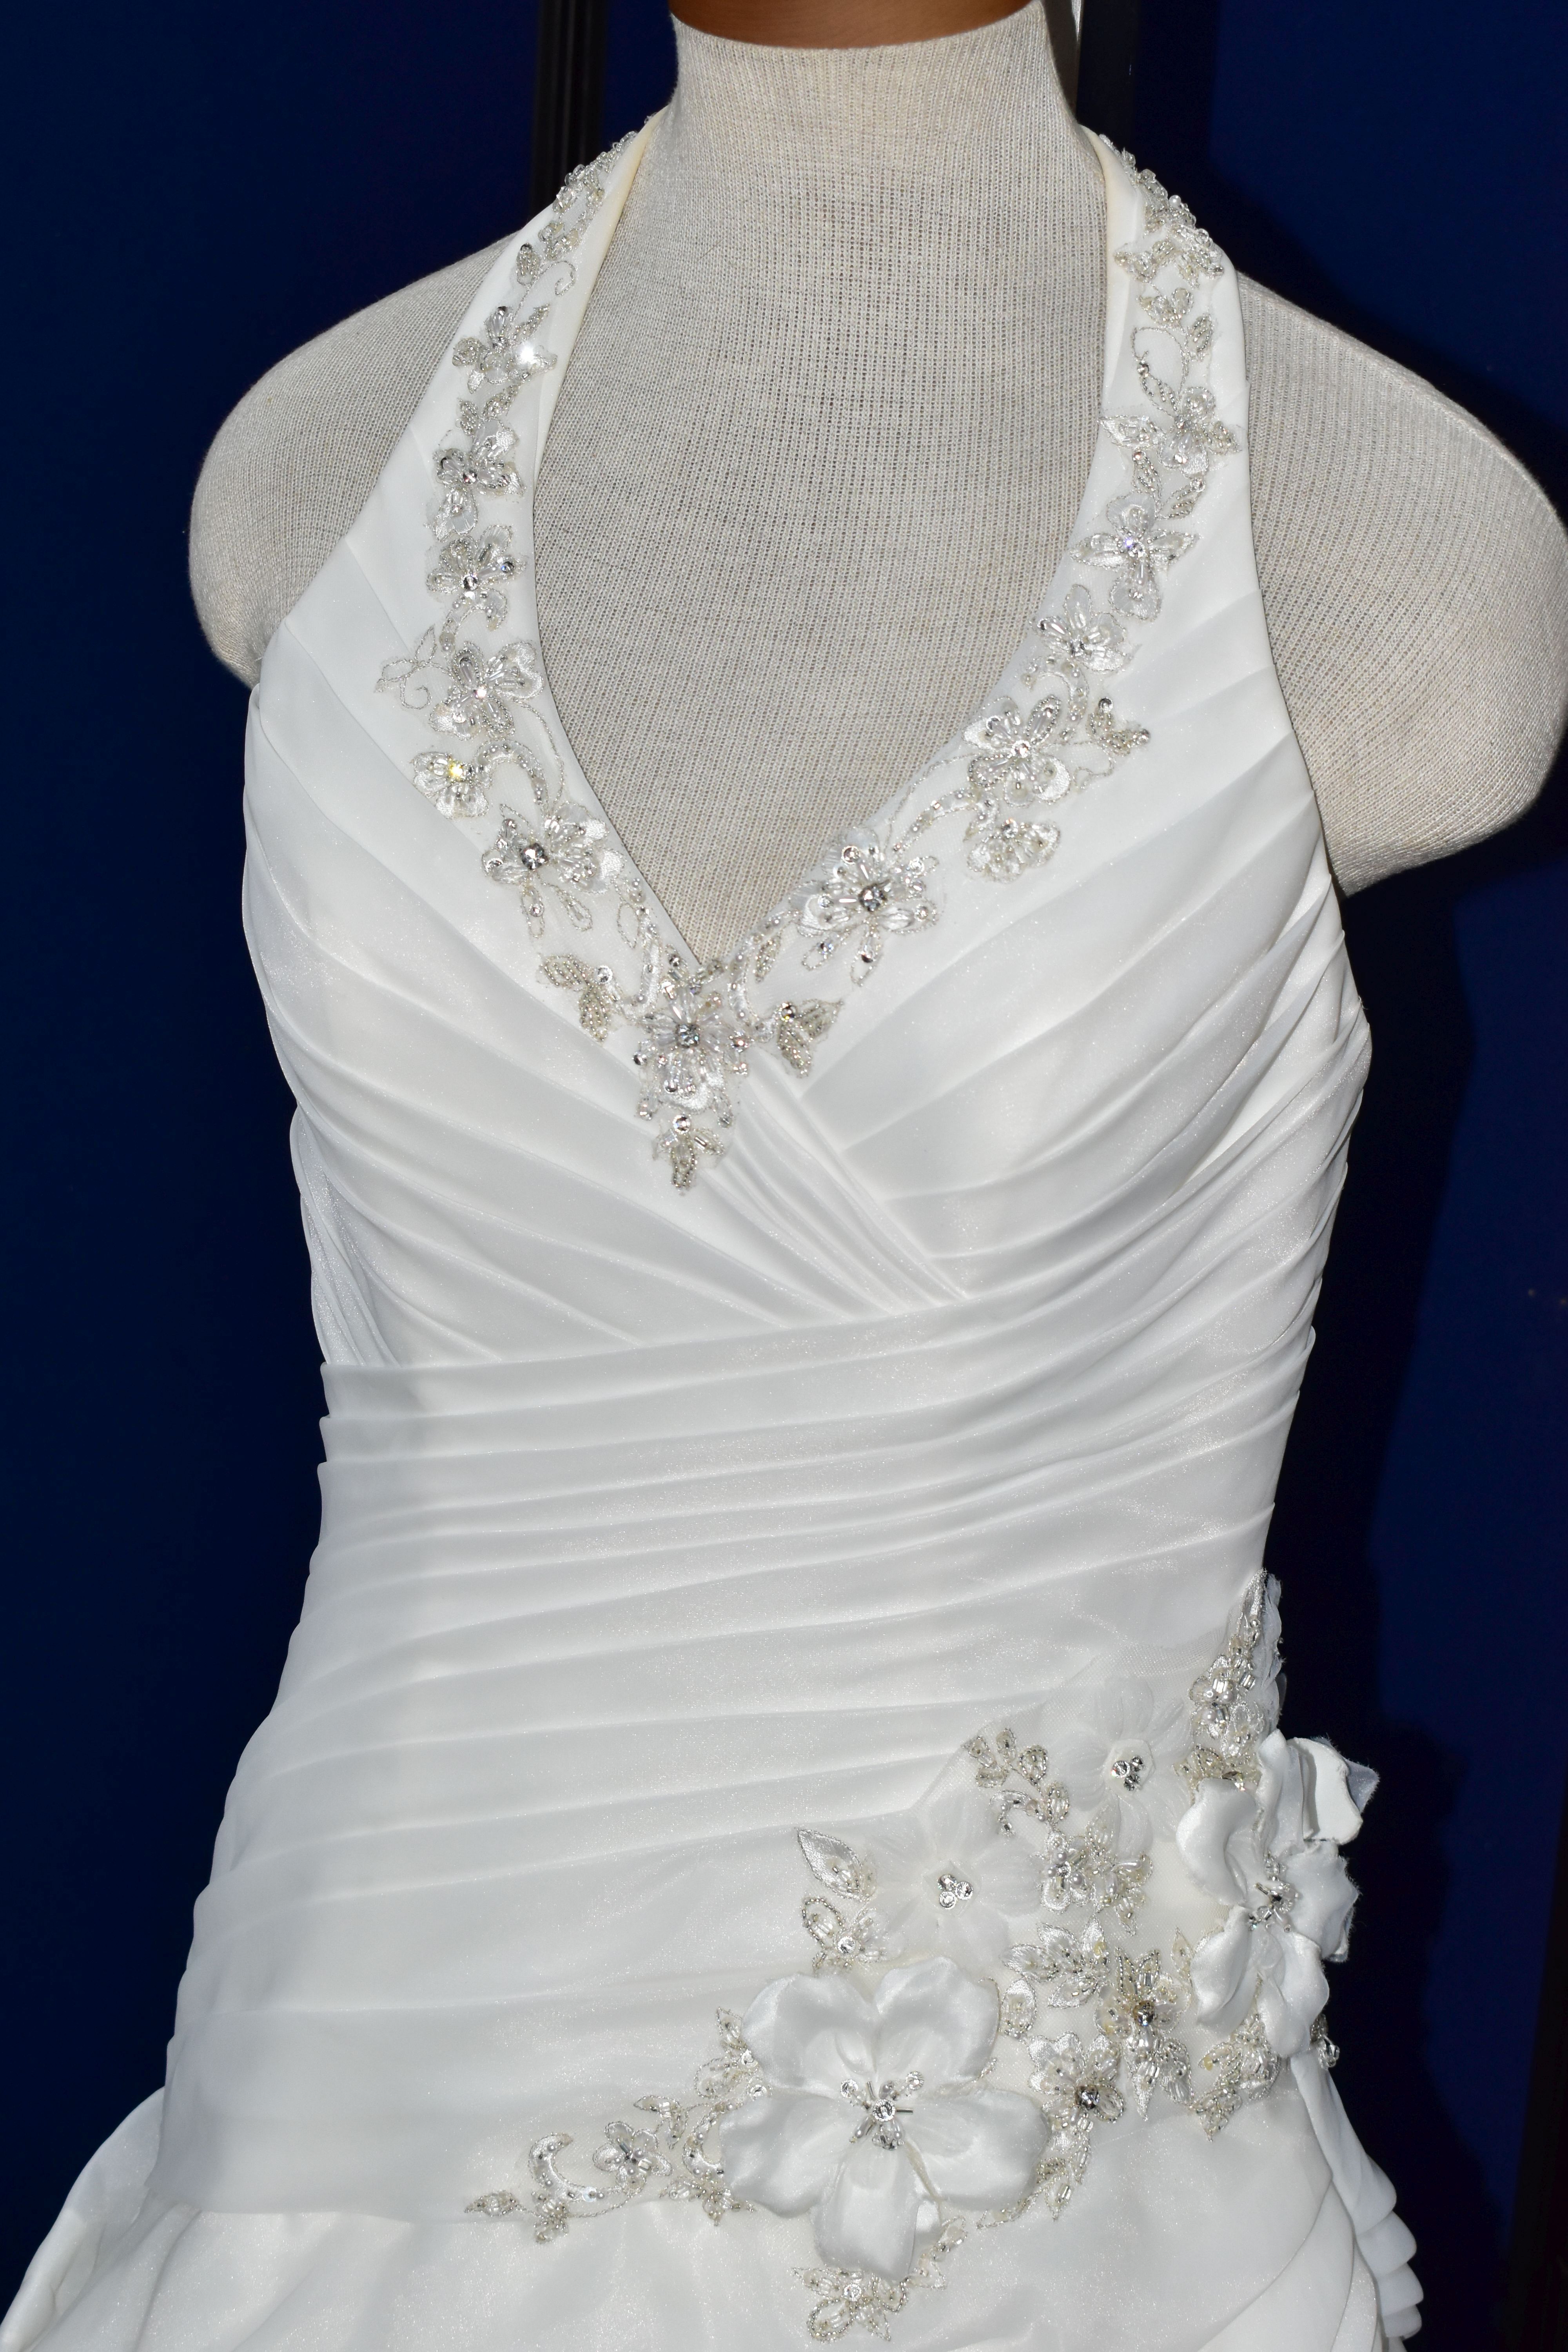 WEDDING GOWN, 'Kenneth Winston' Private Label by G, size 8/10, white pleated bodice, halter neck, - Image 3 of 17